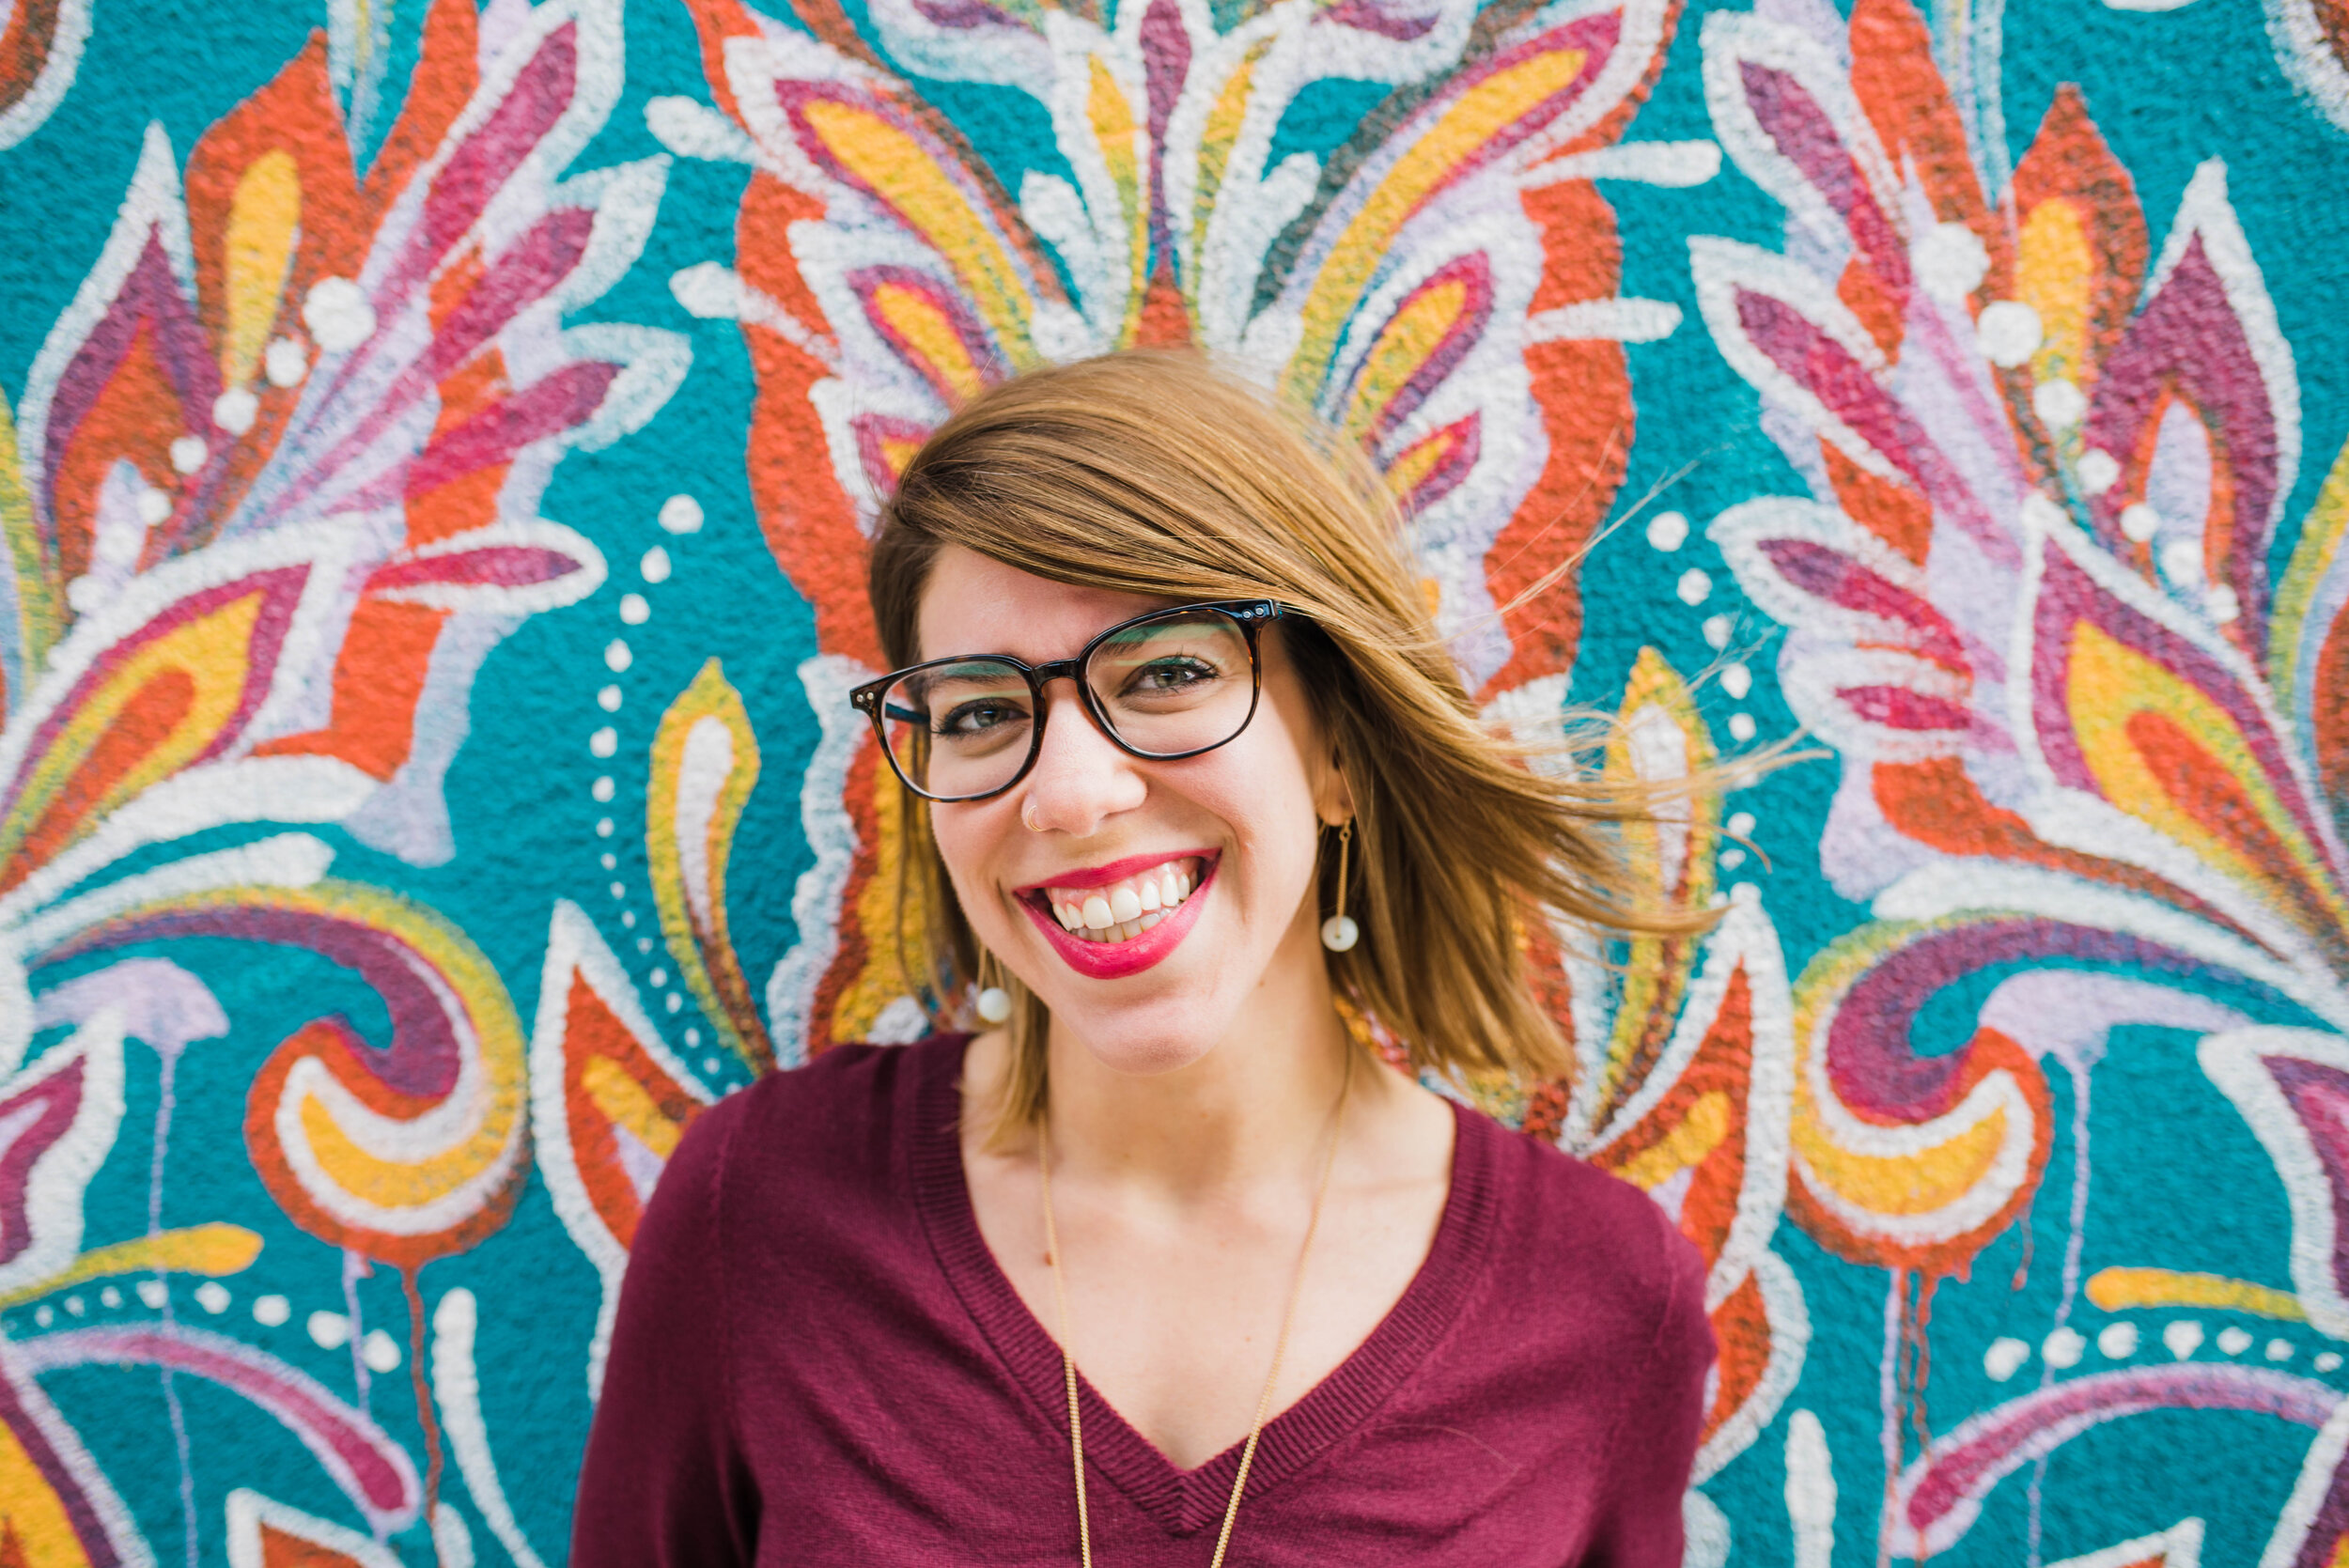 Romance author Kathryn Nolan wanted some updated headshots for her website, social media and book covers. We chatted about her brand and overall boho vibe, so I knew the perfect spot for her session would be the colorful murals around Fishtown.